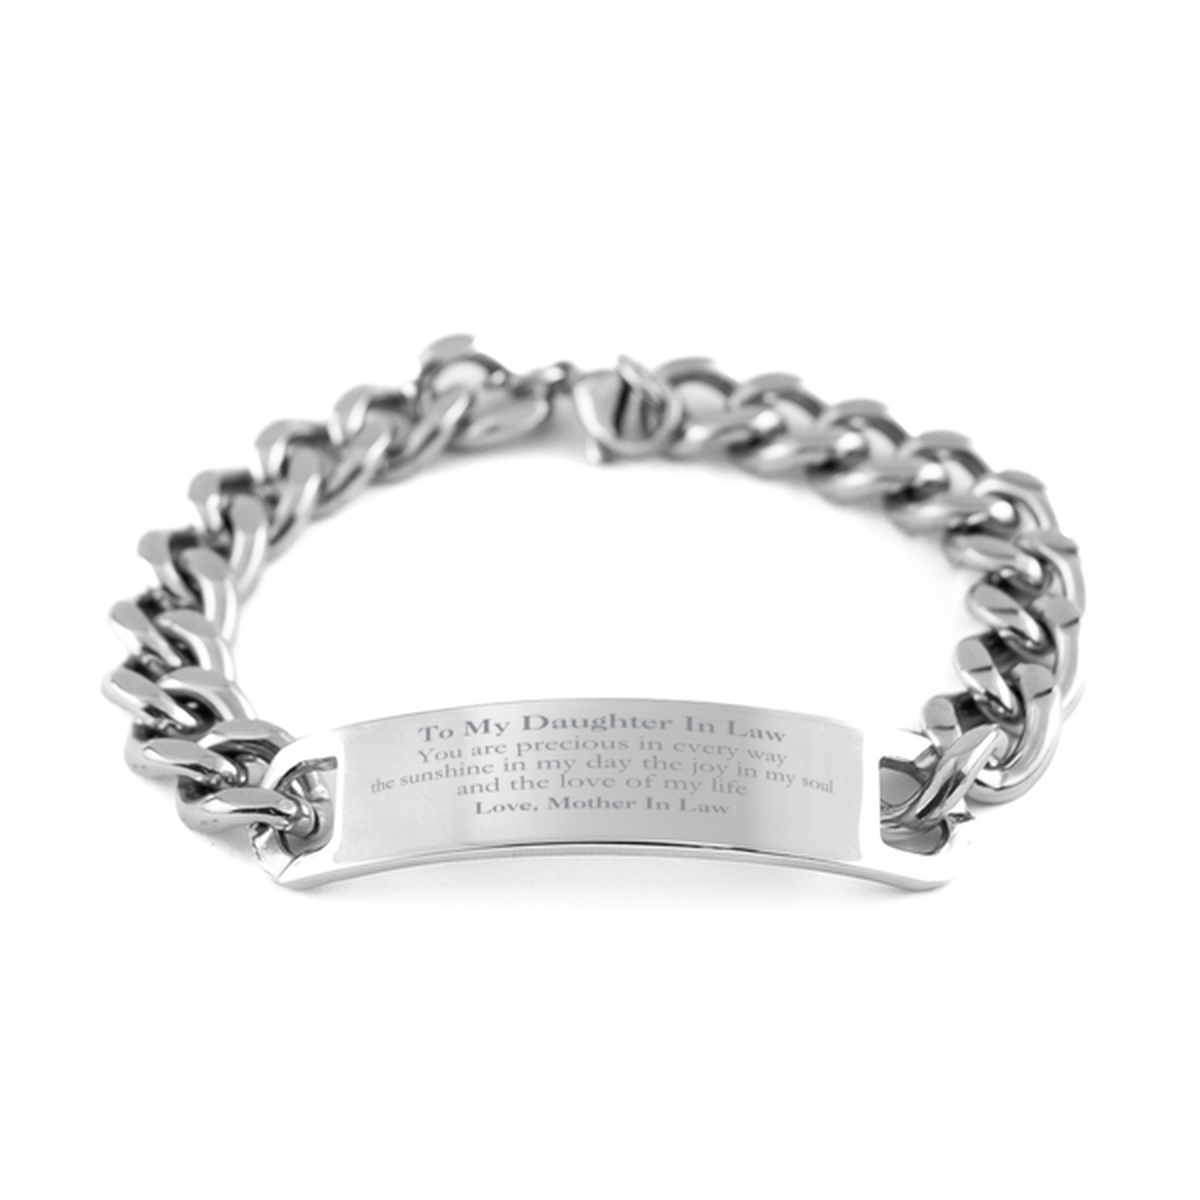 Graduation Gifts for Daughter In Law Cuban Chain Stainless Steel Bracelet Present from Mother In Law, Christmas Daughter In Law Birthday Gifts Daughter In Law You are precious in every way the sunshine in my day. Love, Mother In Law